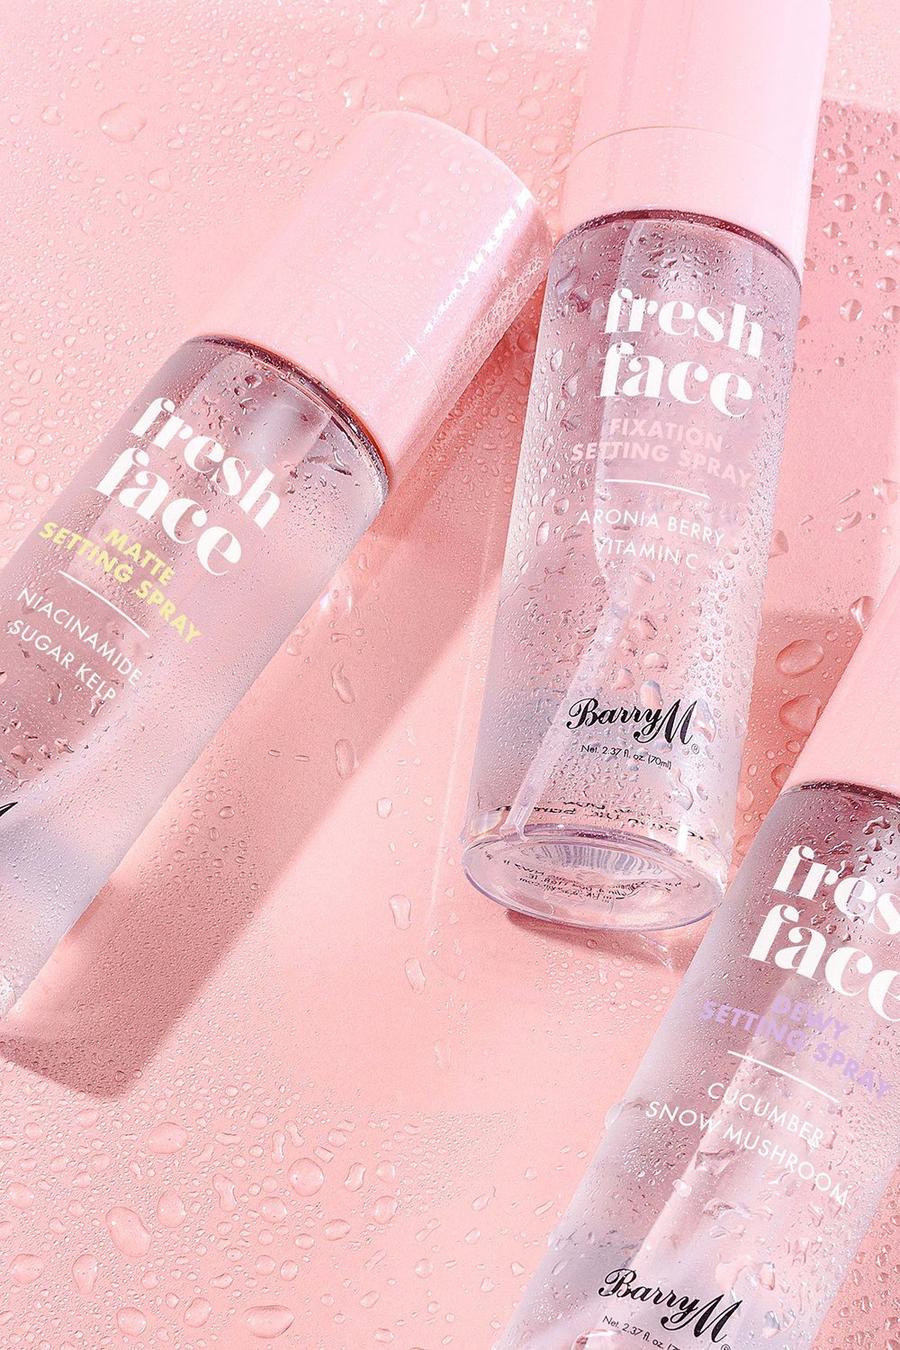 Barry M - Spray fissante Fresh Face effetto Matte, Clear image number 1